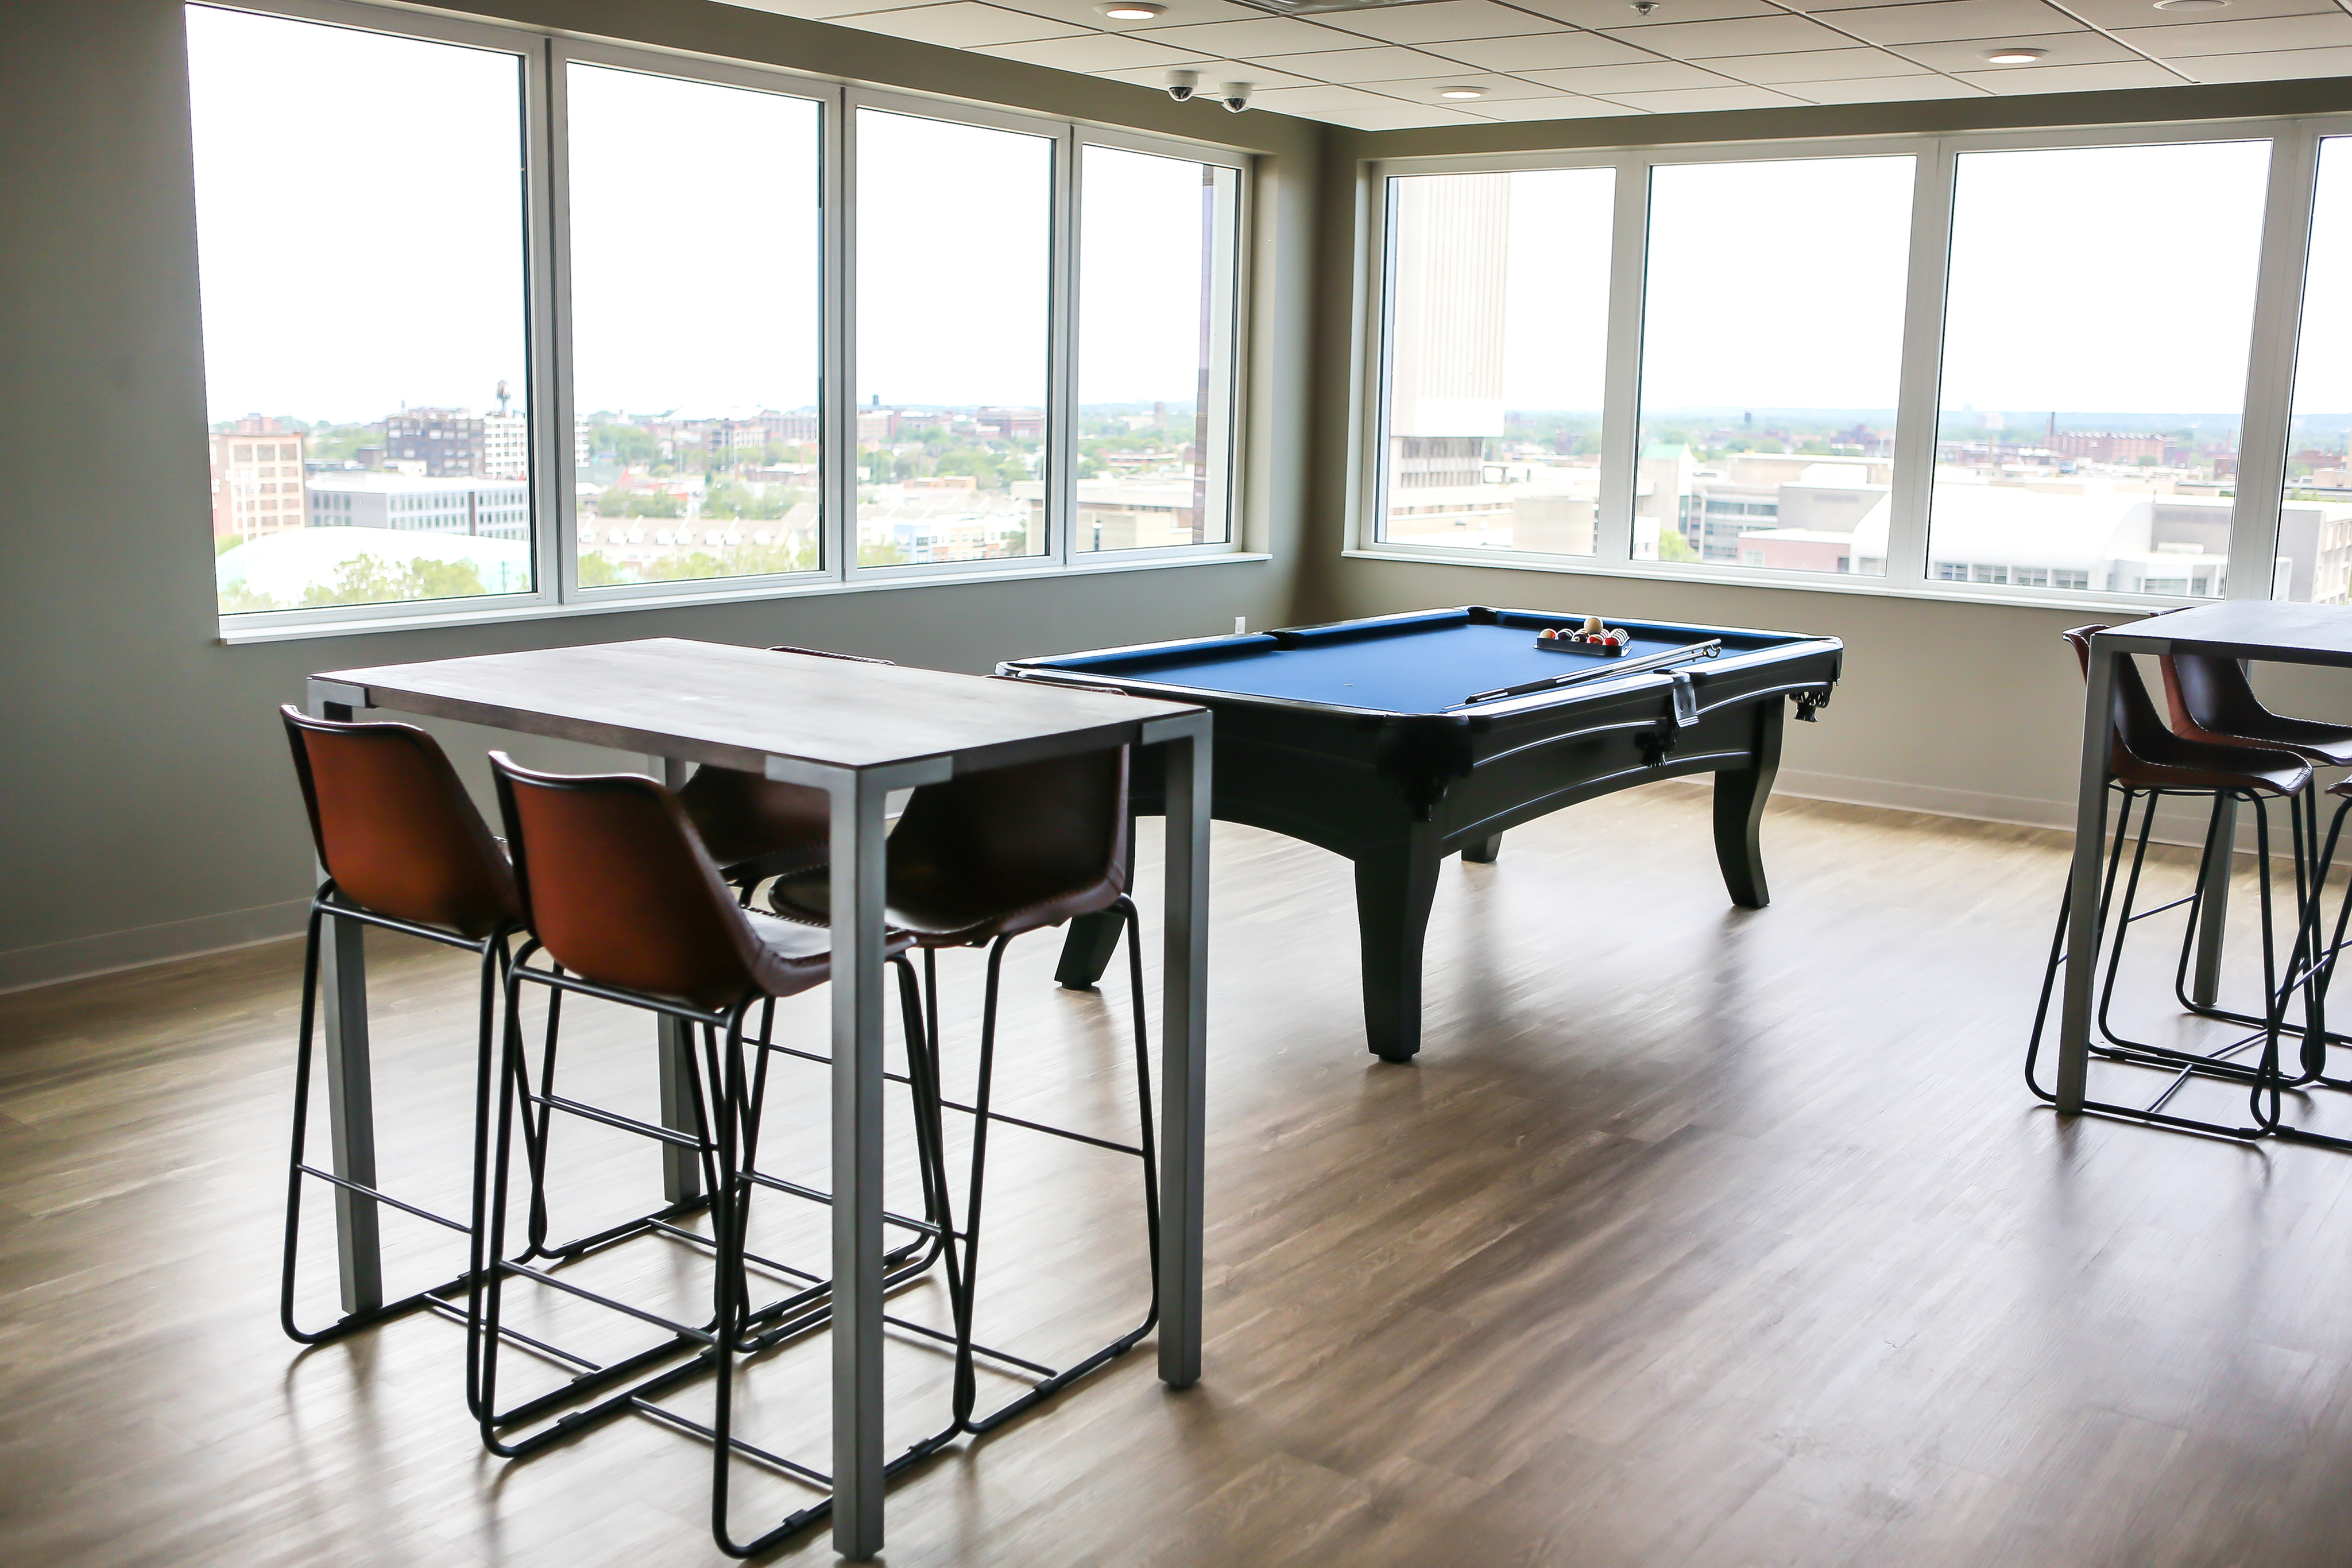 Residents Relaxing in Club Room | Cleveland OH Apartment For Rent | The Edge on Euclid